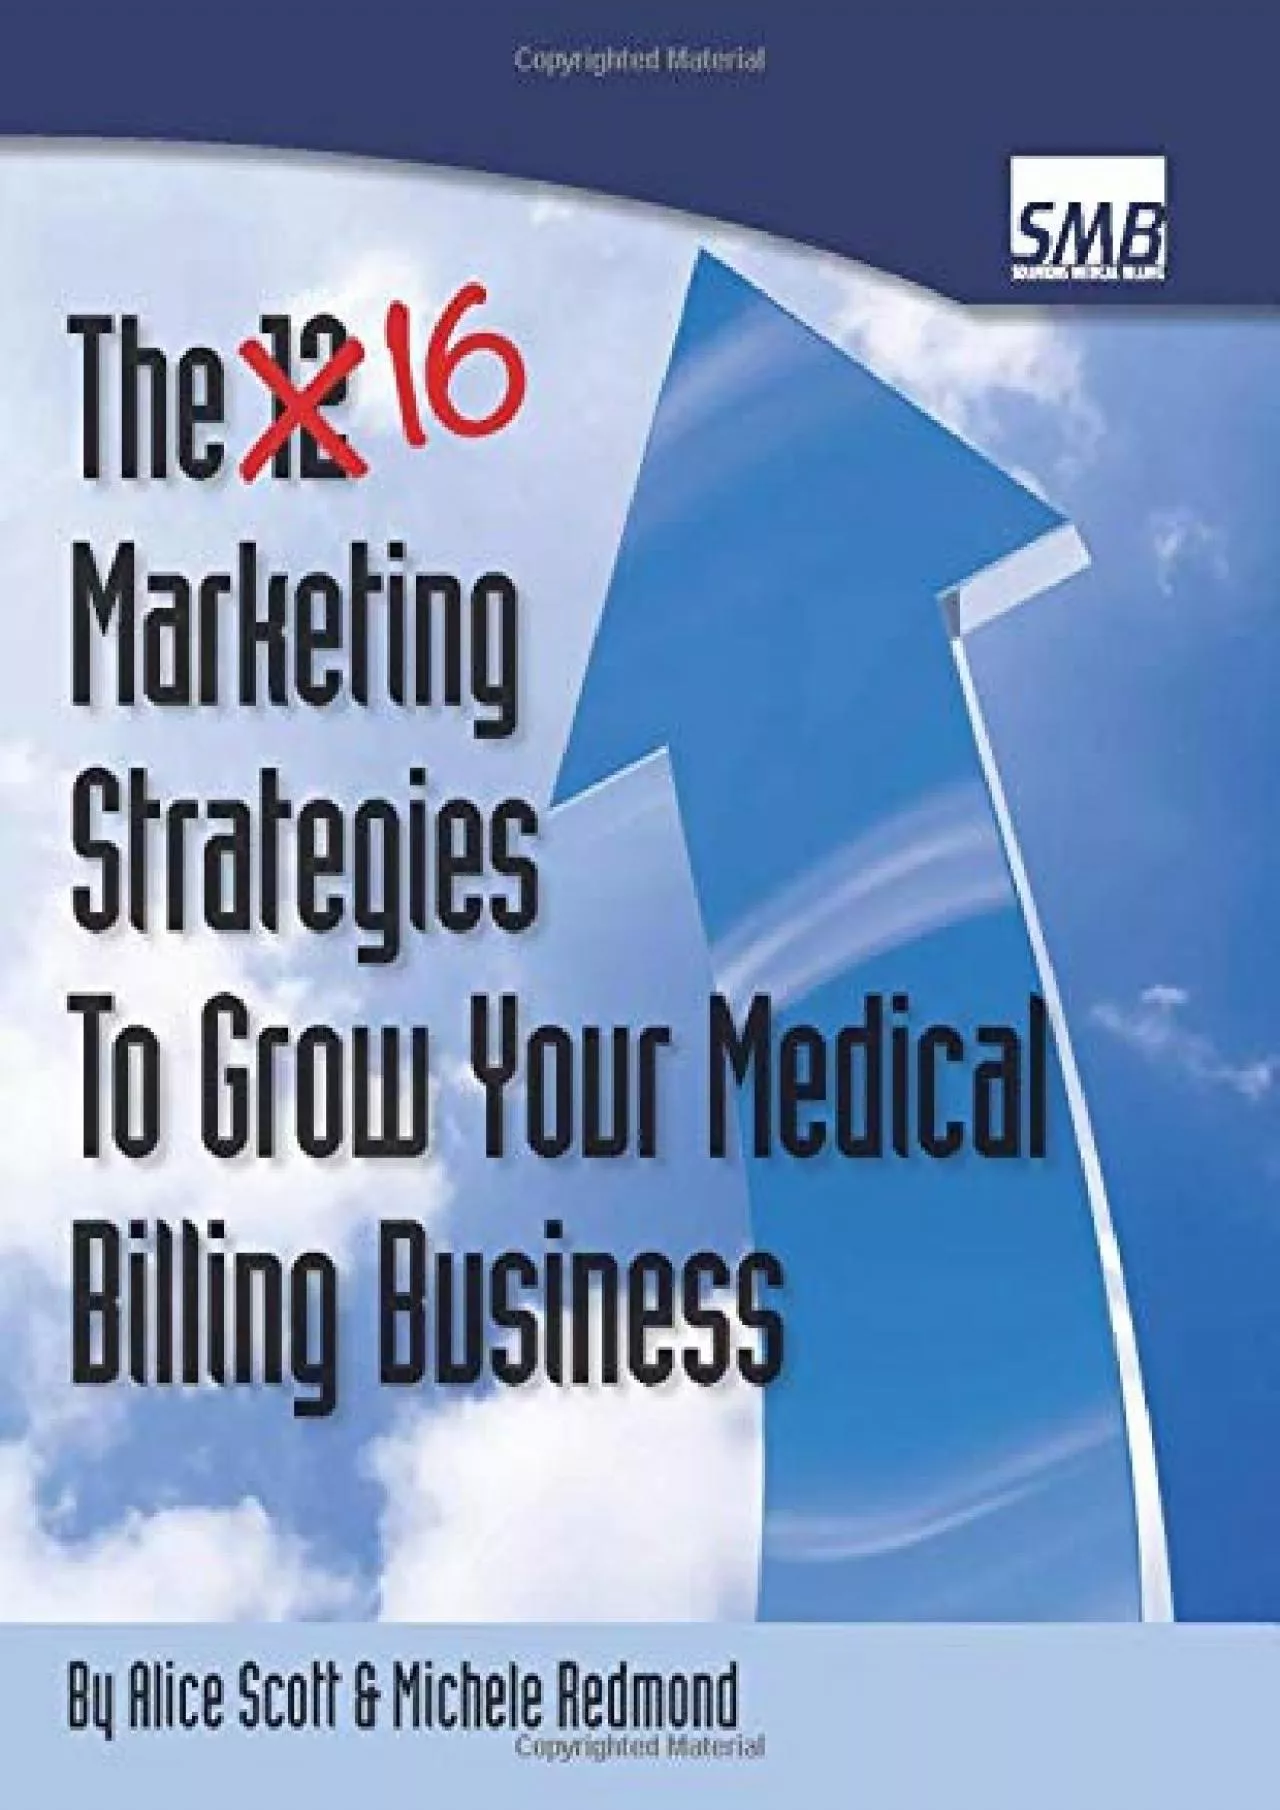 (BOOS)-12 Marketing Strategies To Grow Your Medical Billing Business: Boost Your Medical